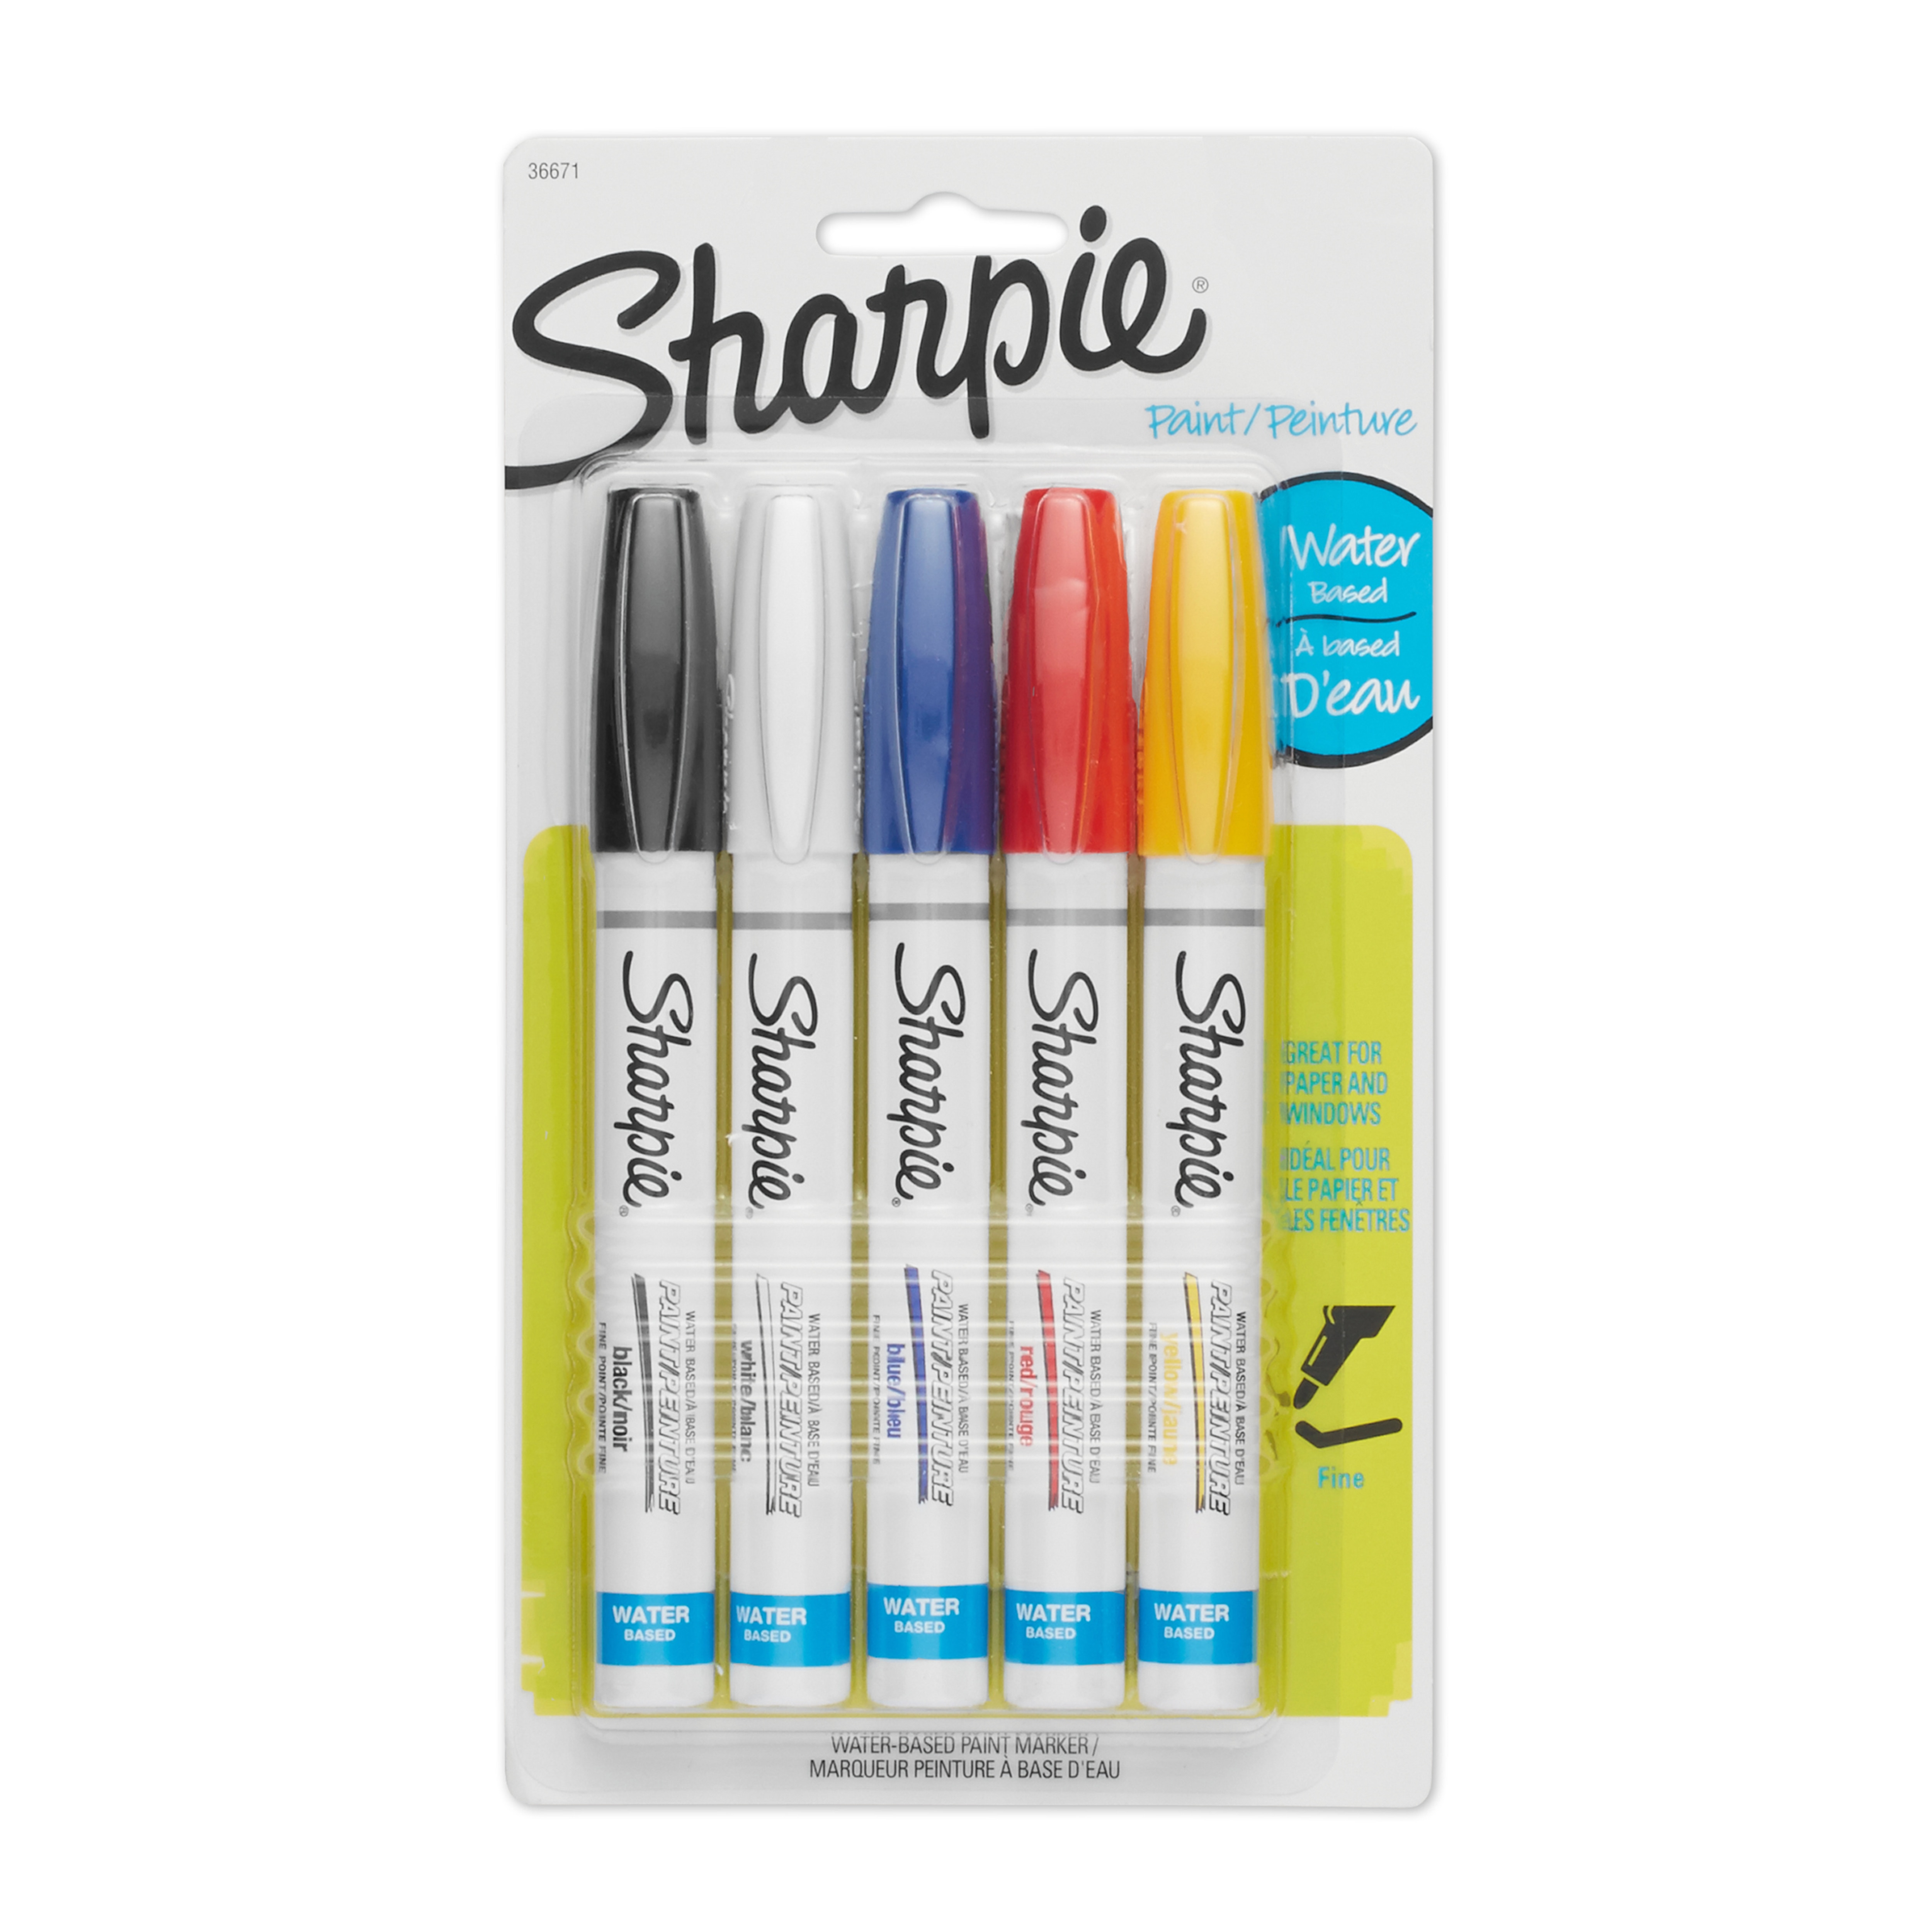 Sharpie Poster Paint Marker Set, Carded Packaging, Fine, 5-Colors